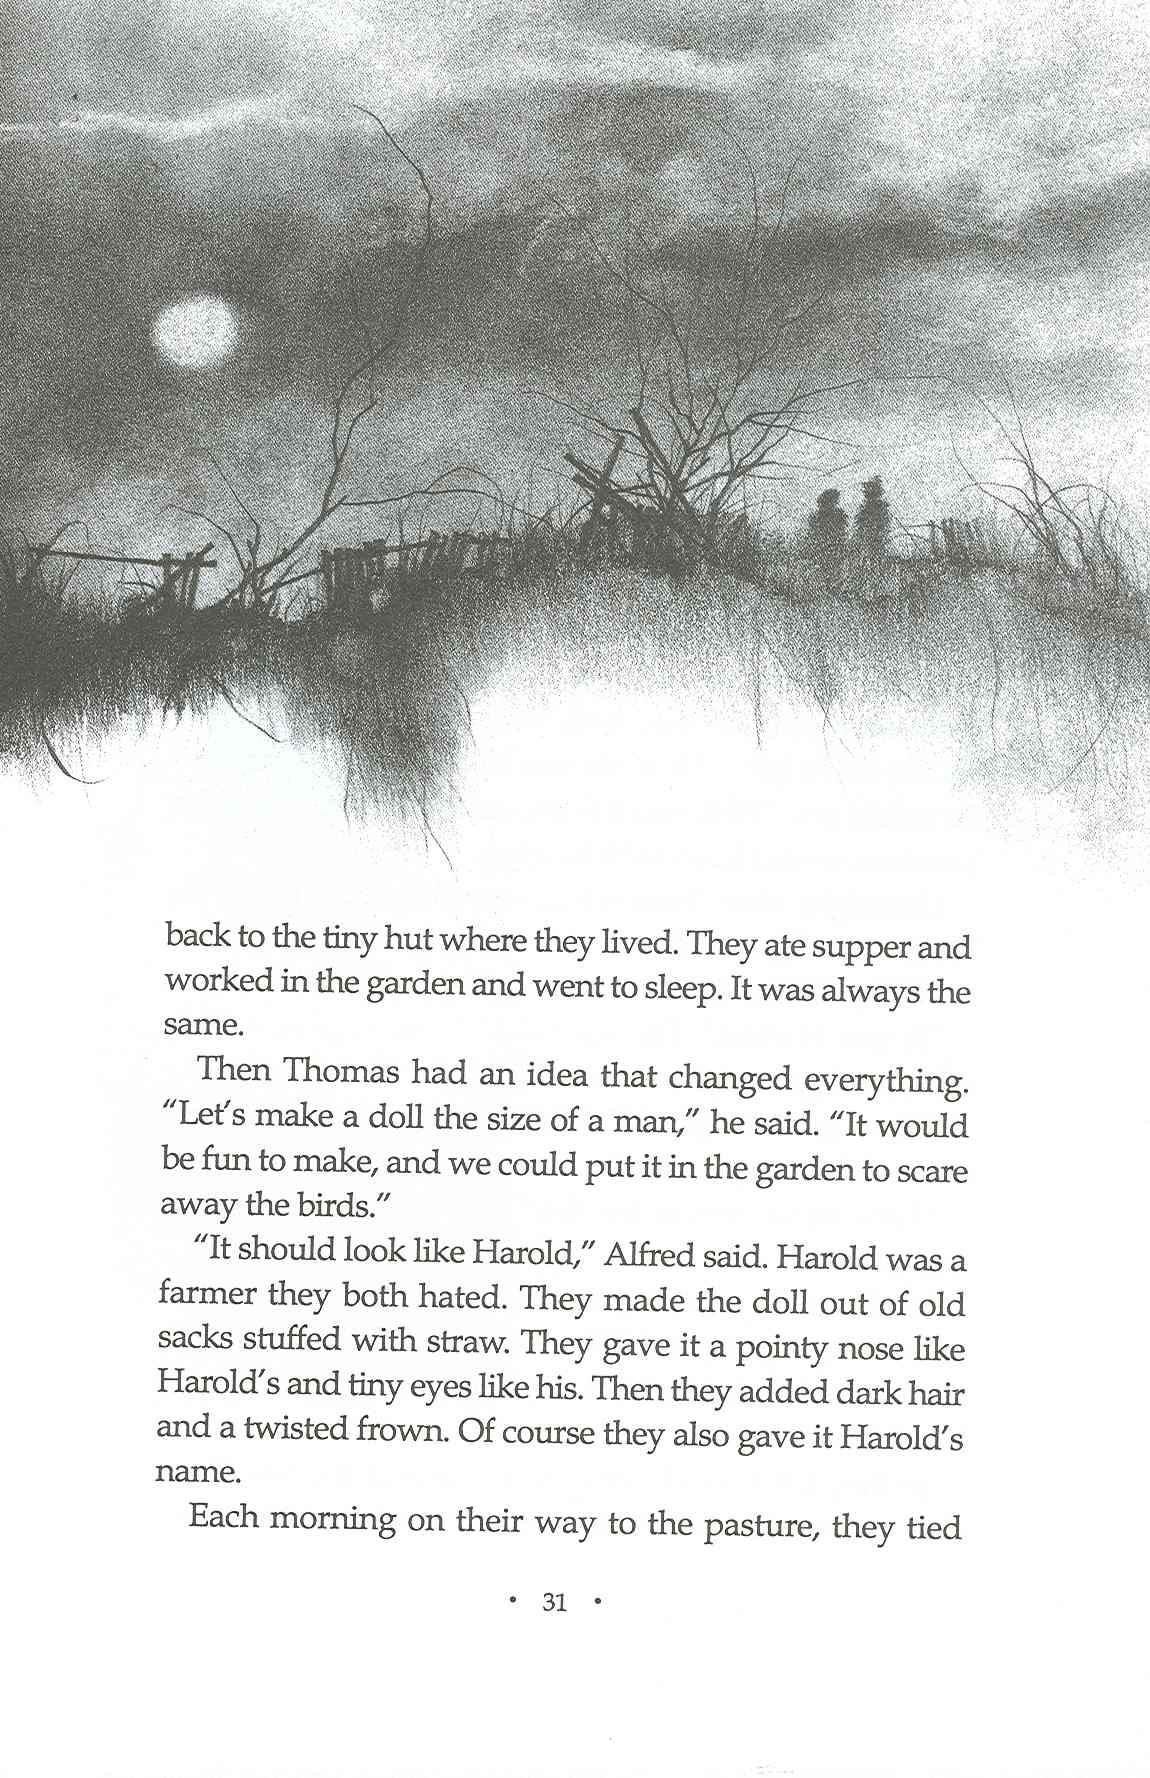 Online Book Of Scary Stories To Tell In The Dark